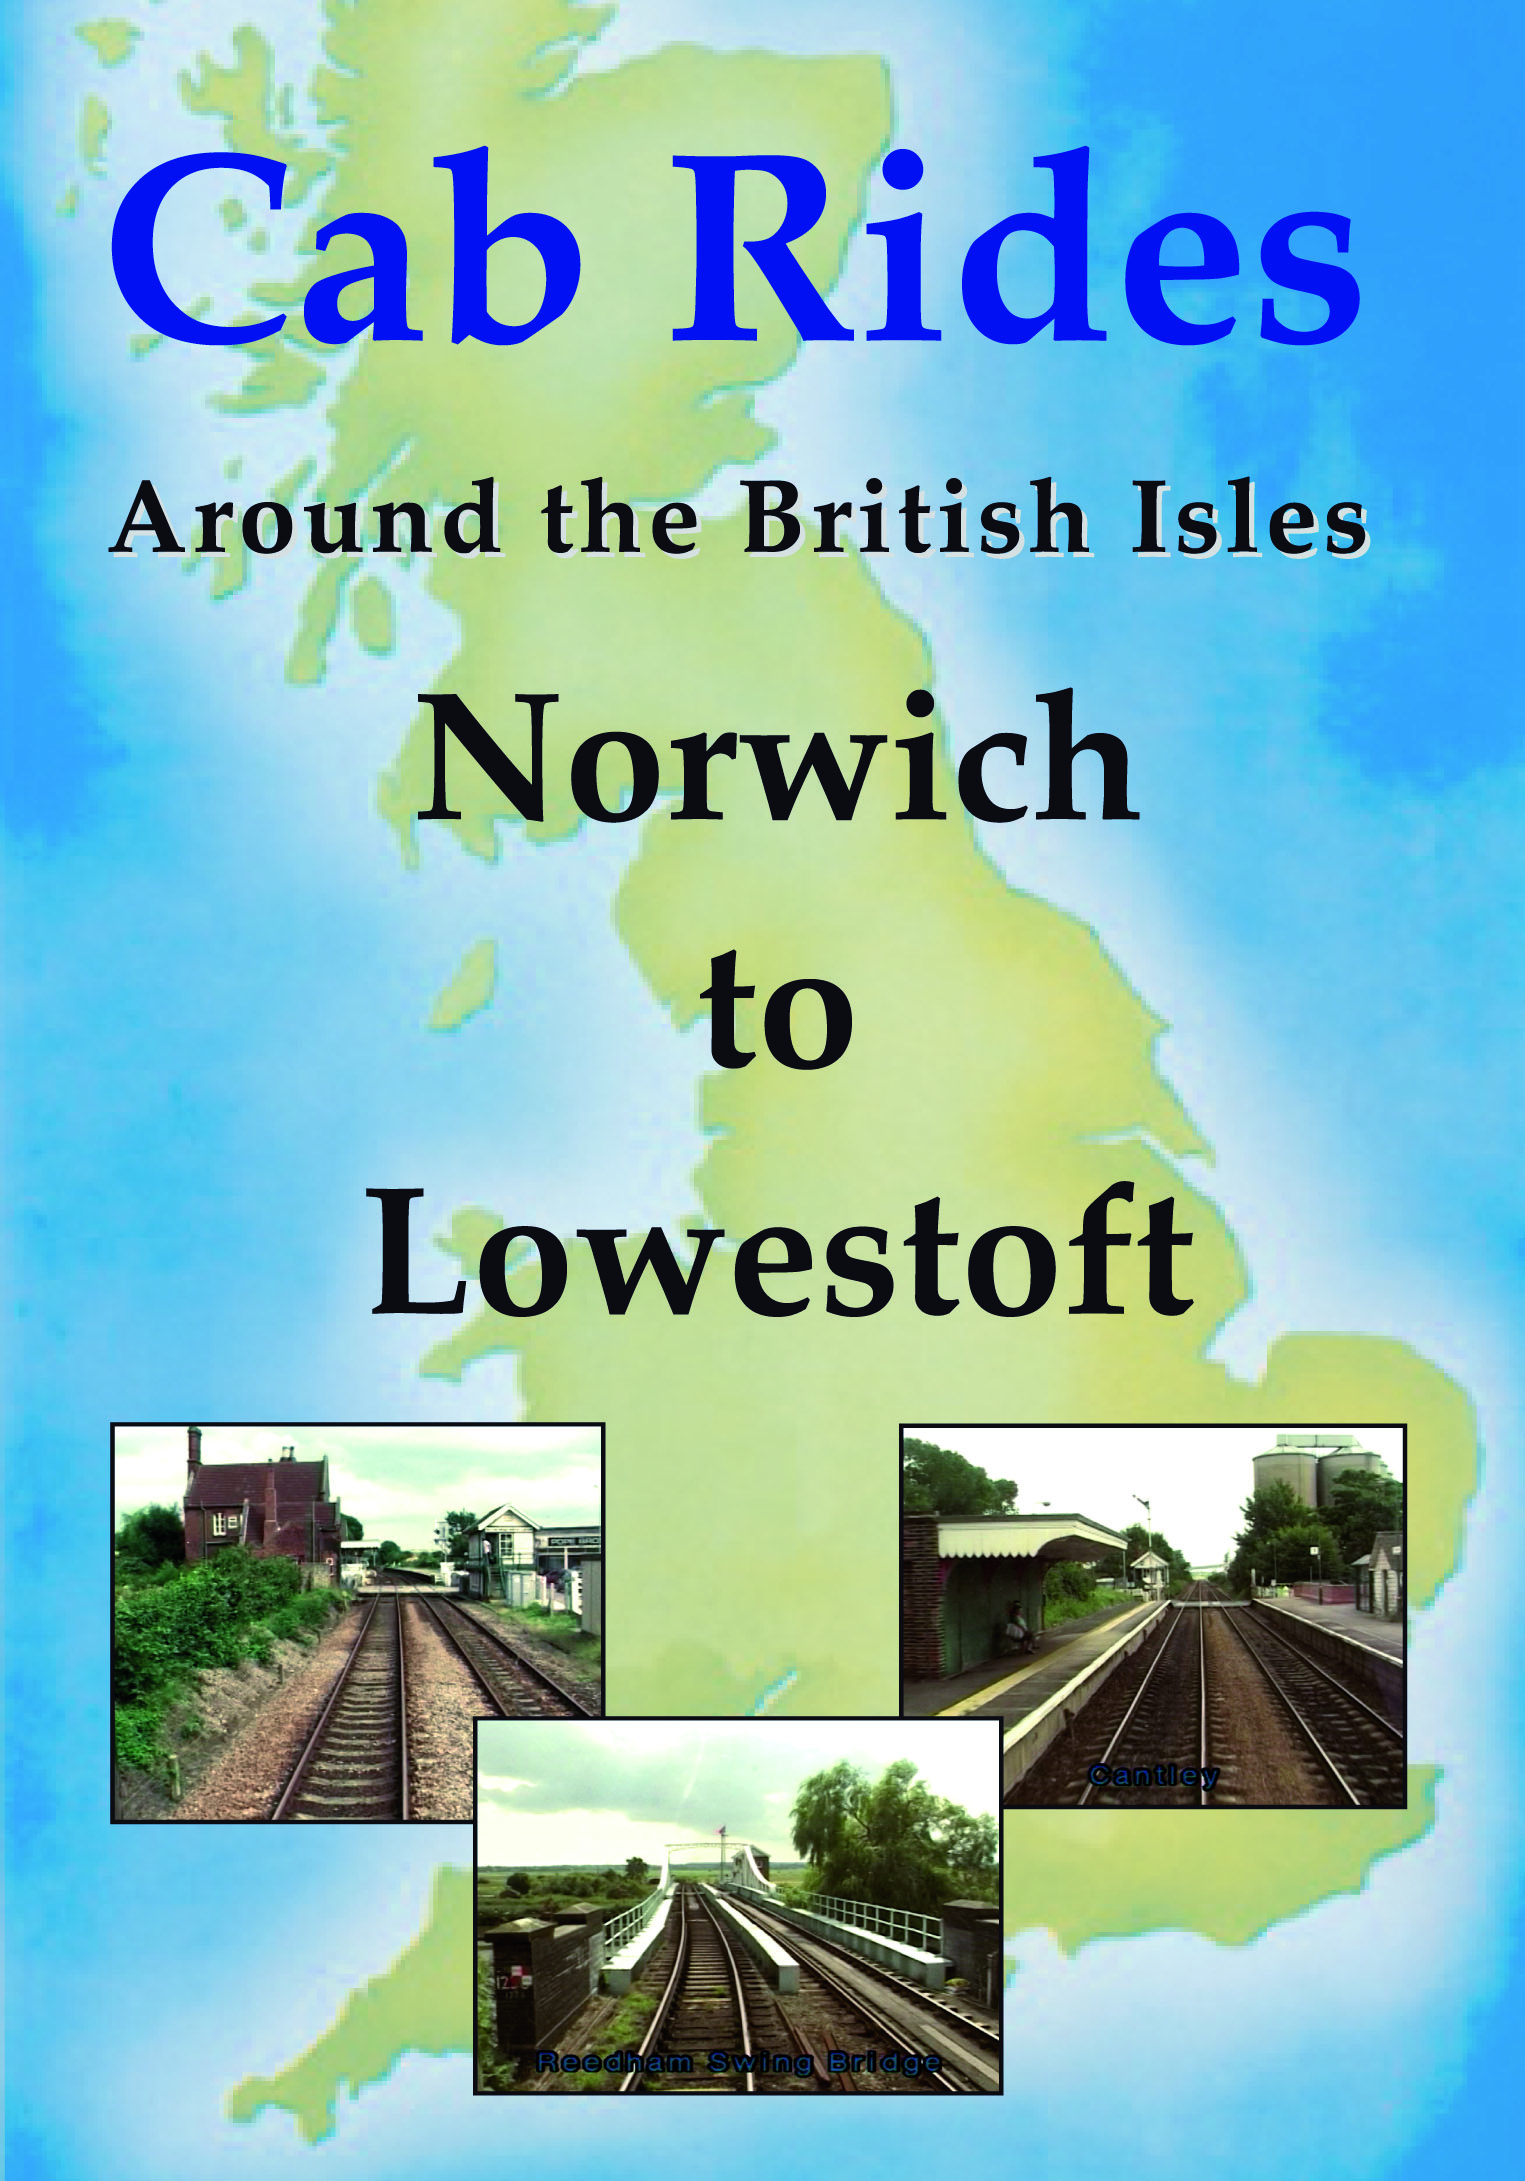 Cab Rides Around the British Isles: Norwich to Lowestoft and Return  in 2001